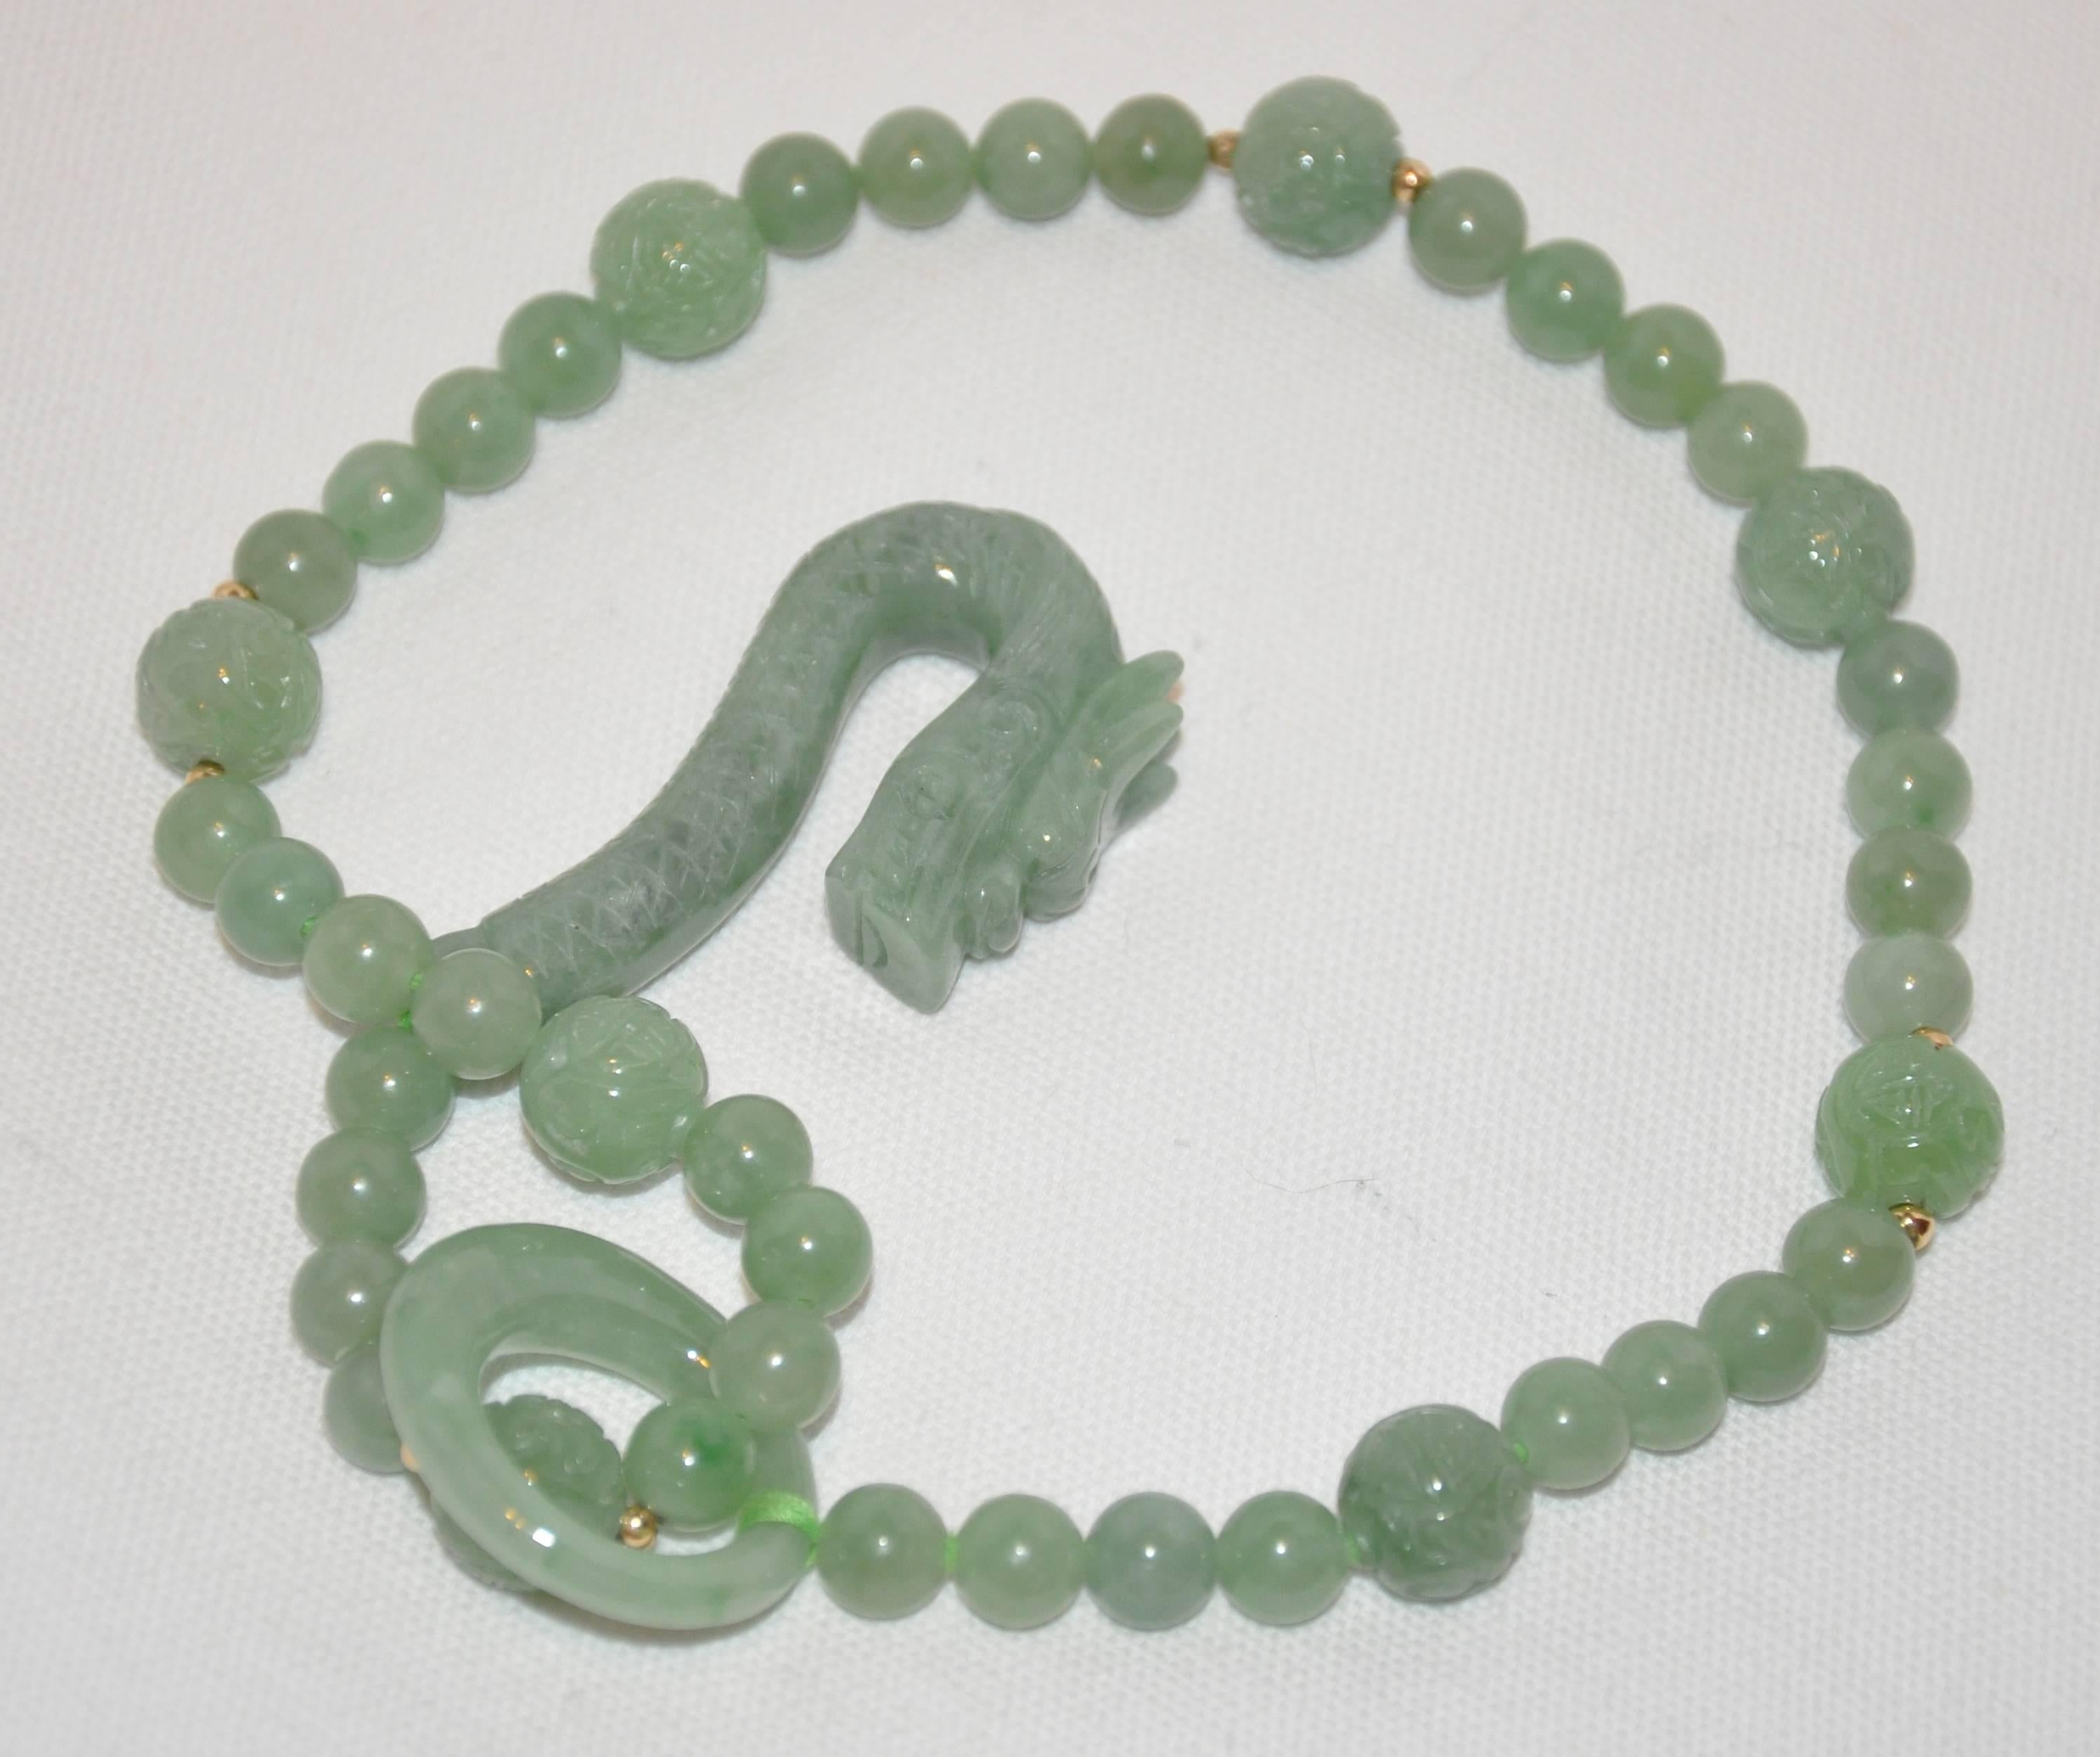        This wonderfully detailed hand-knotted jadeite necklace is feature with a dragon-head which drapes on the end and a loop on the other beautifully hanging. This beautiful necklace is hand-knotted and measures 19" in total length. The